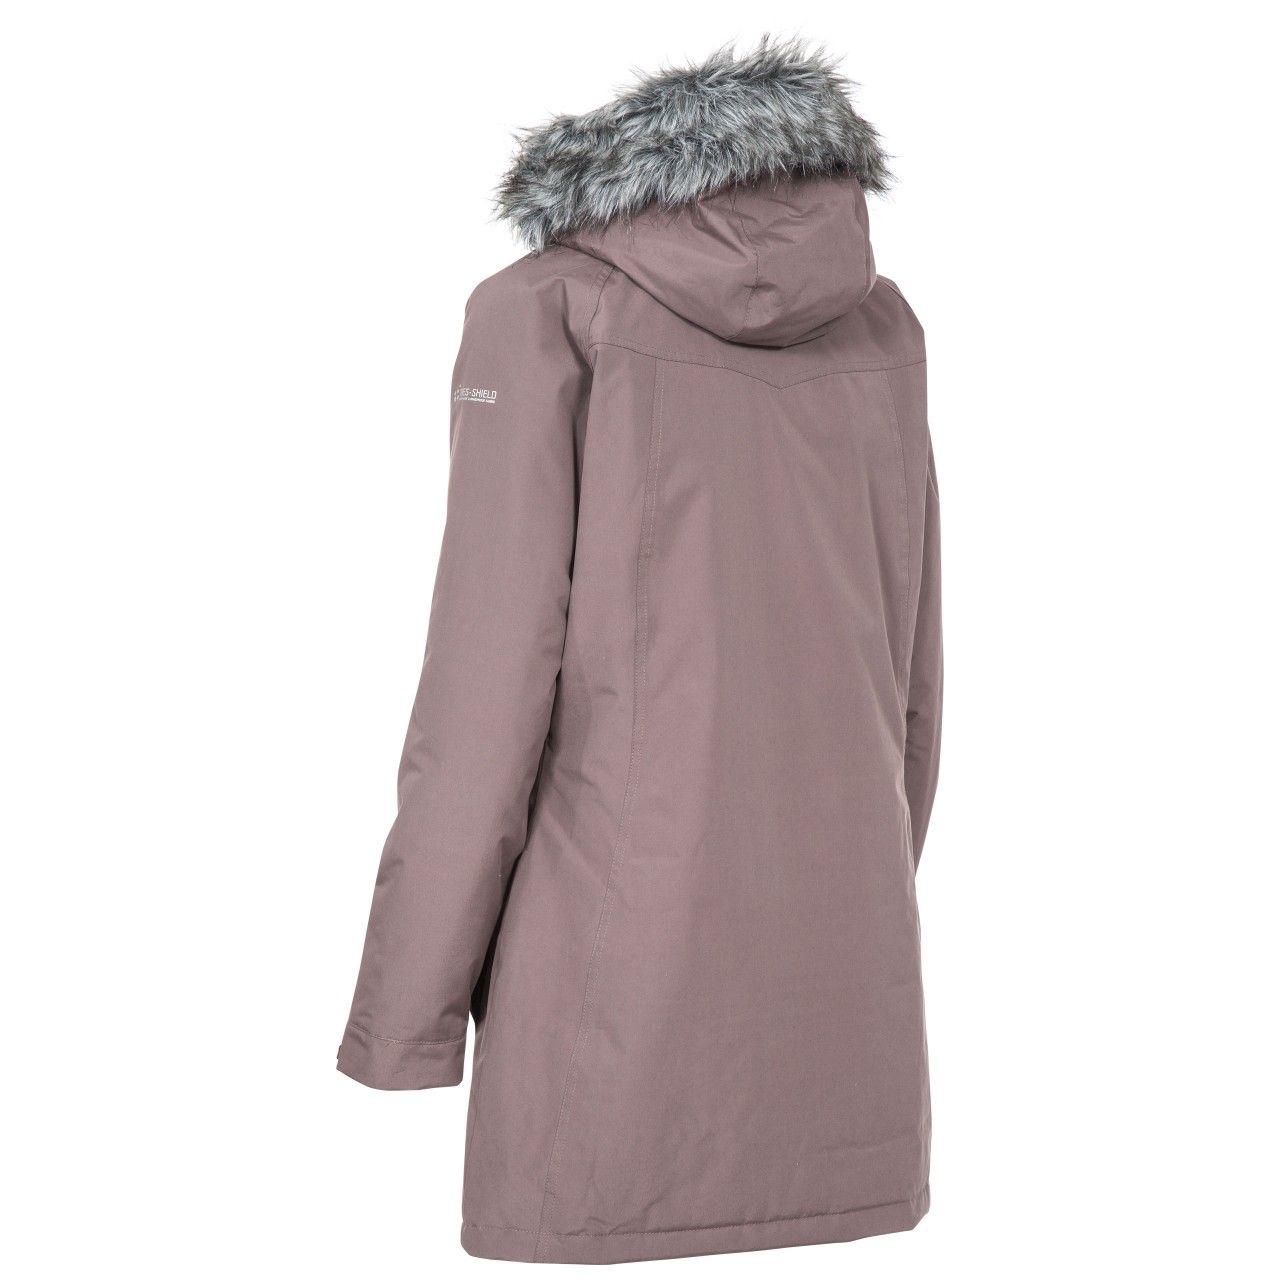 Padded. Printed lining. 2 zip pockets. Detachable zip off hood. Zip off faux fur hood trim. Adjustable cuffs. Longer length. Waterproof 5000mm, windproof. Taped seams. Shell: 100% Polyester microfibre PVC, Lining: 100% Polyester, Padding: 100% Polyester.